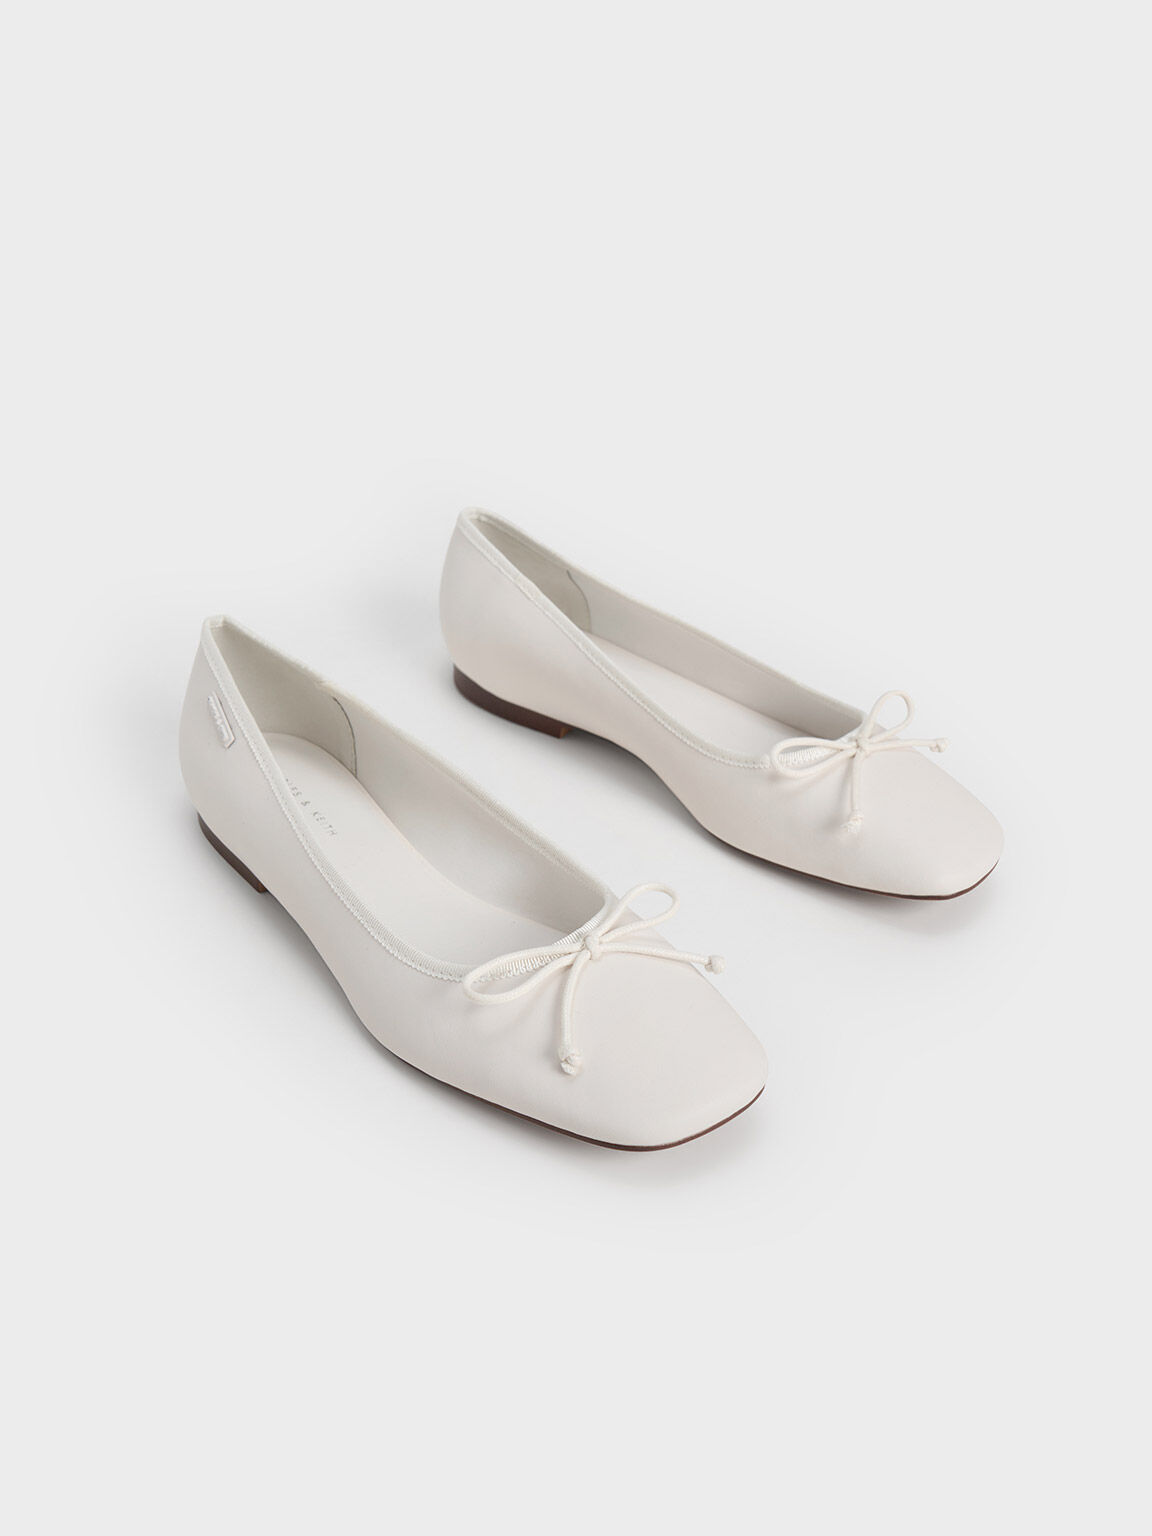 Rounded Square-Toe Bow Ballerinas, White, hi-res